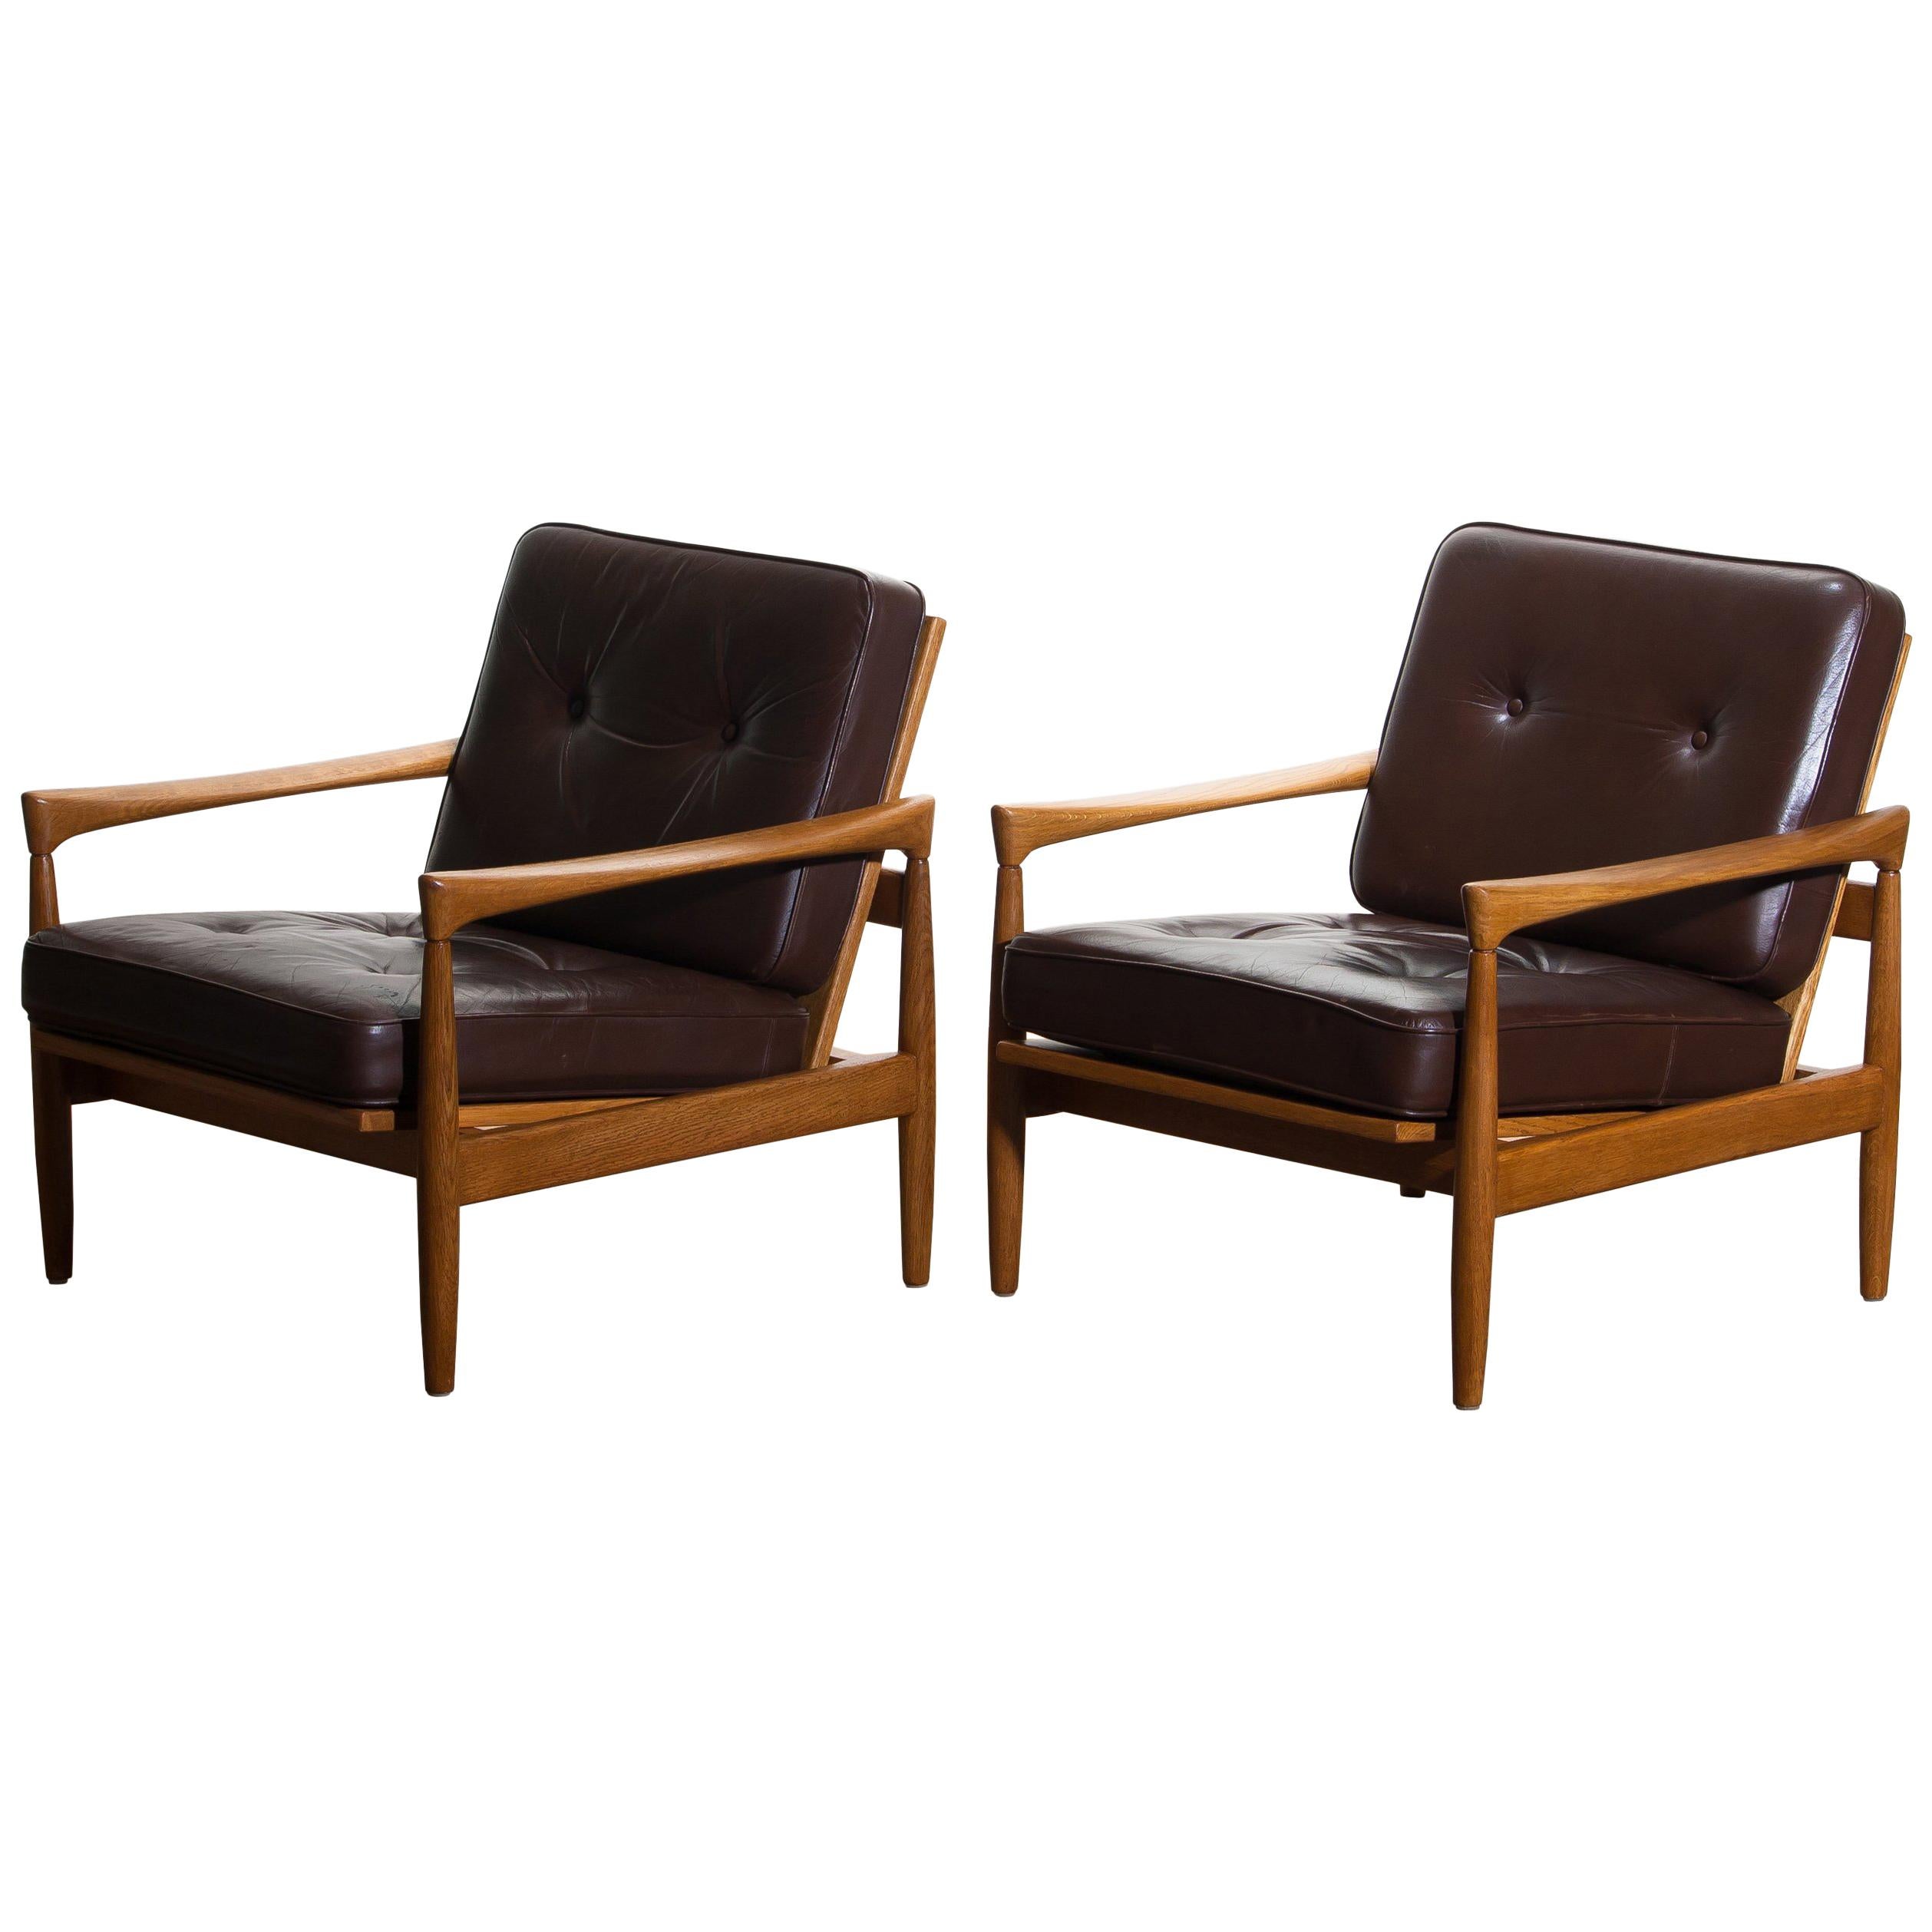 1960s, Set of Two Oak and Brown Leather Easy or Lounge Chairs by Erik Wörtz In Good Condition In Silvolde, Gelderland